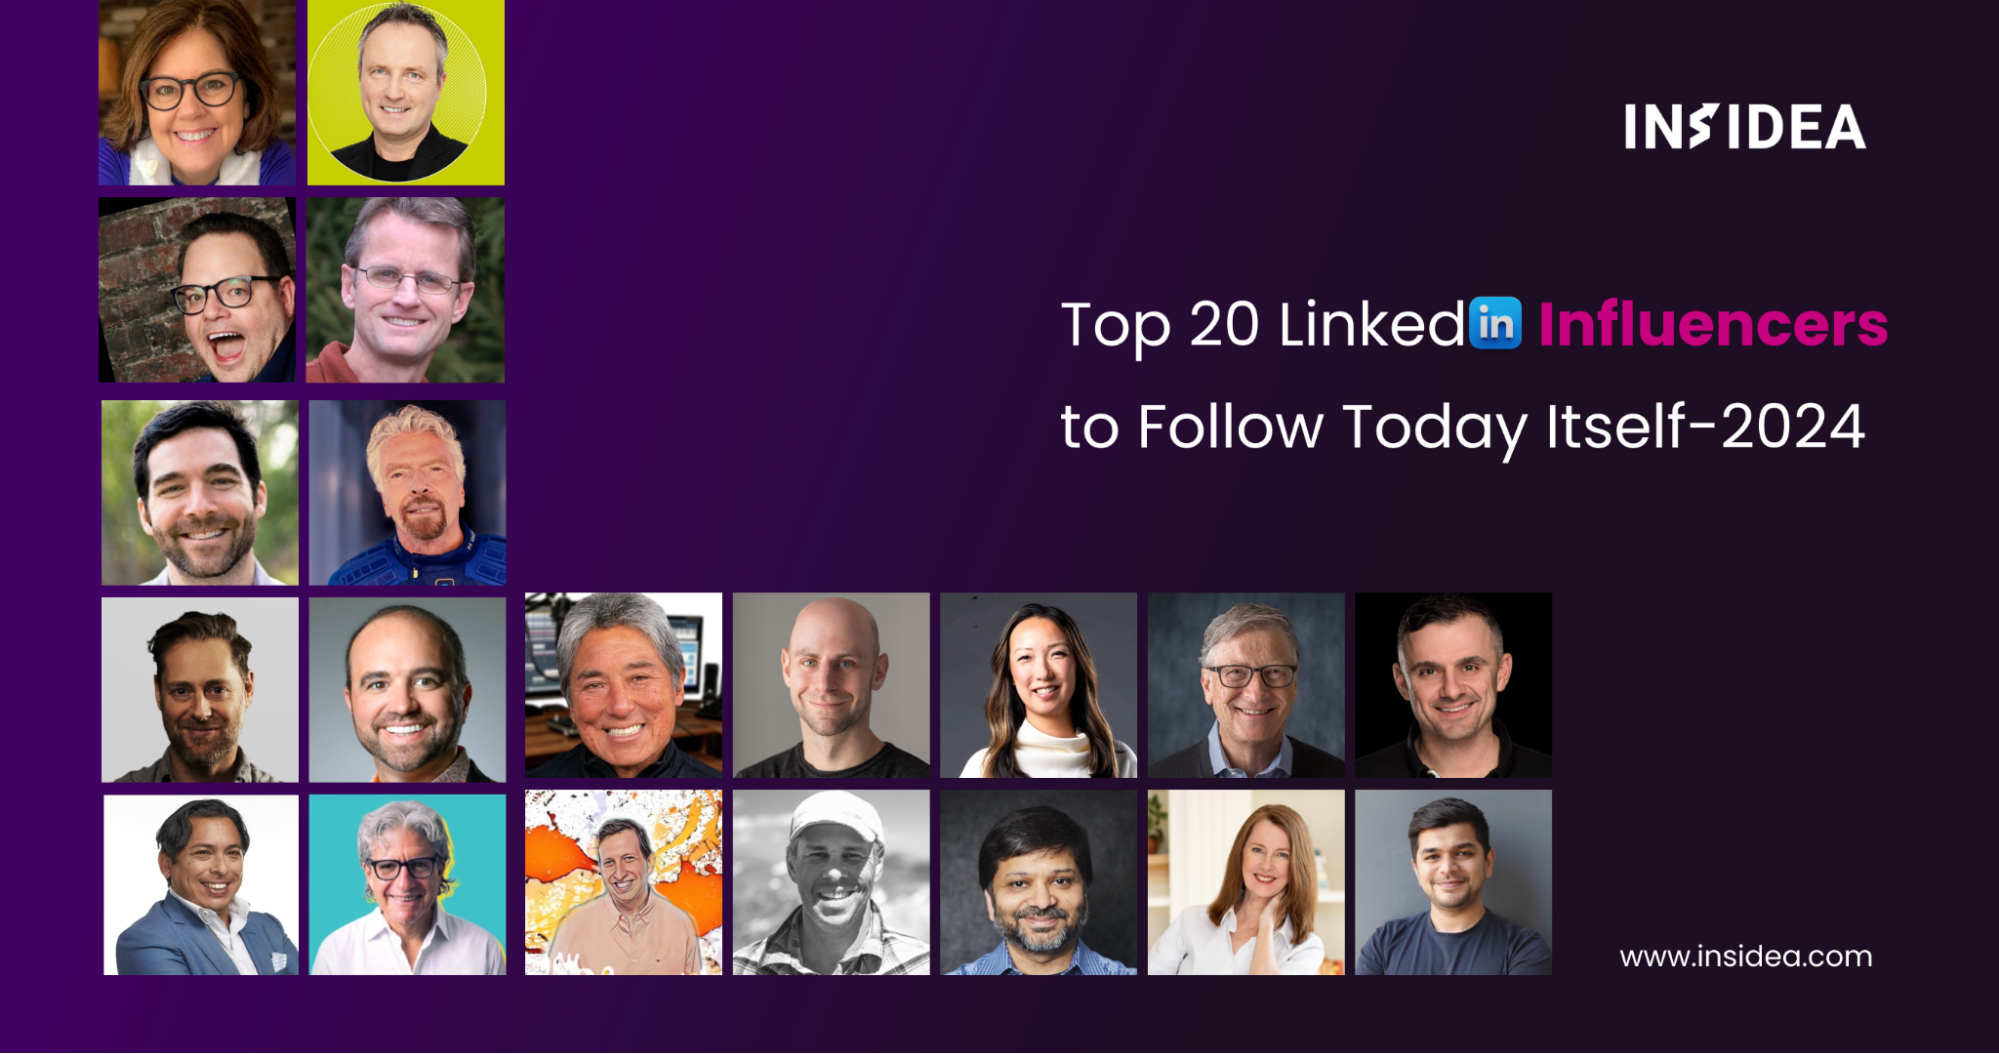 Top 20 LinkedIn Influencers to Follow Today Itself-2024